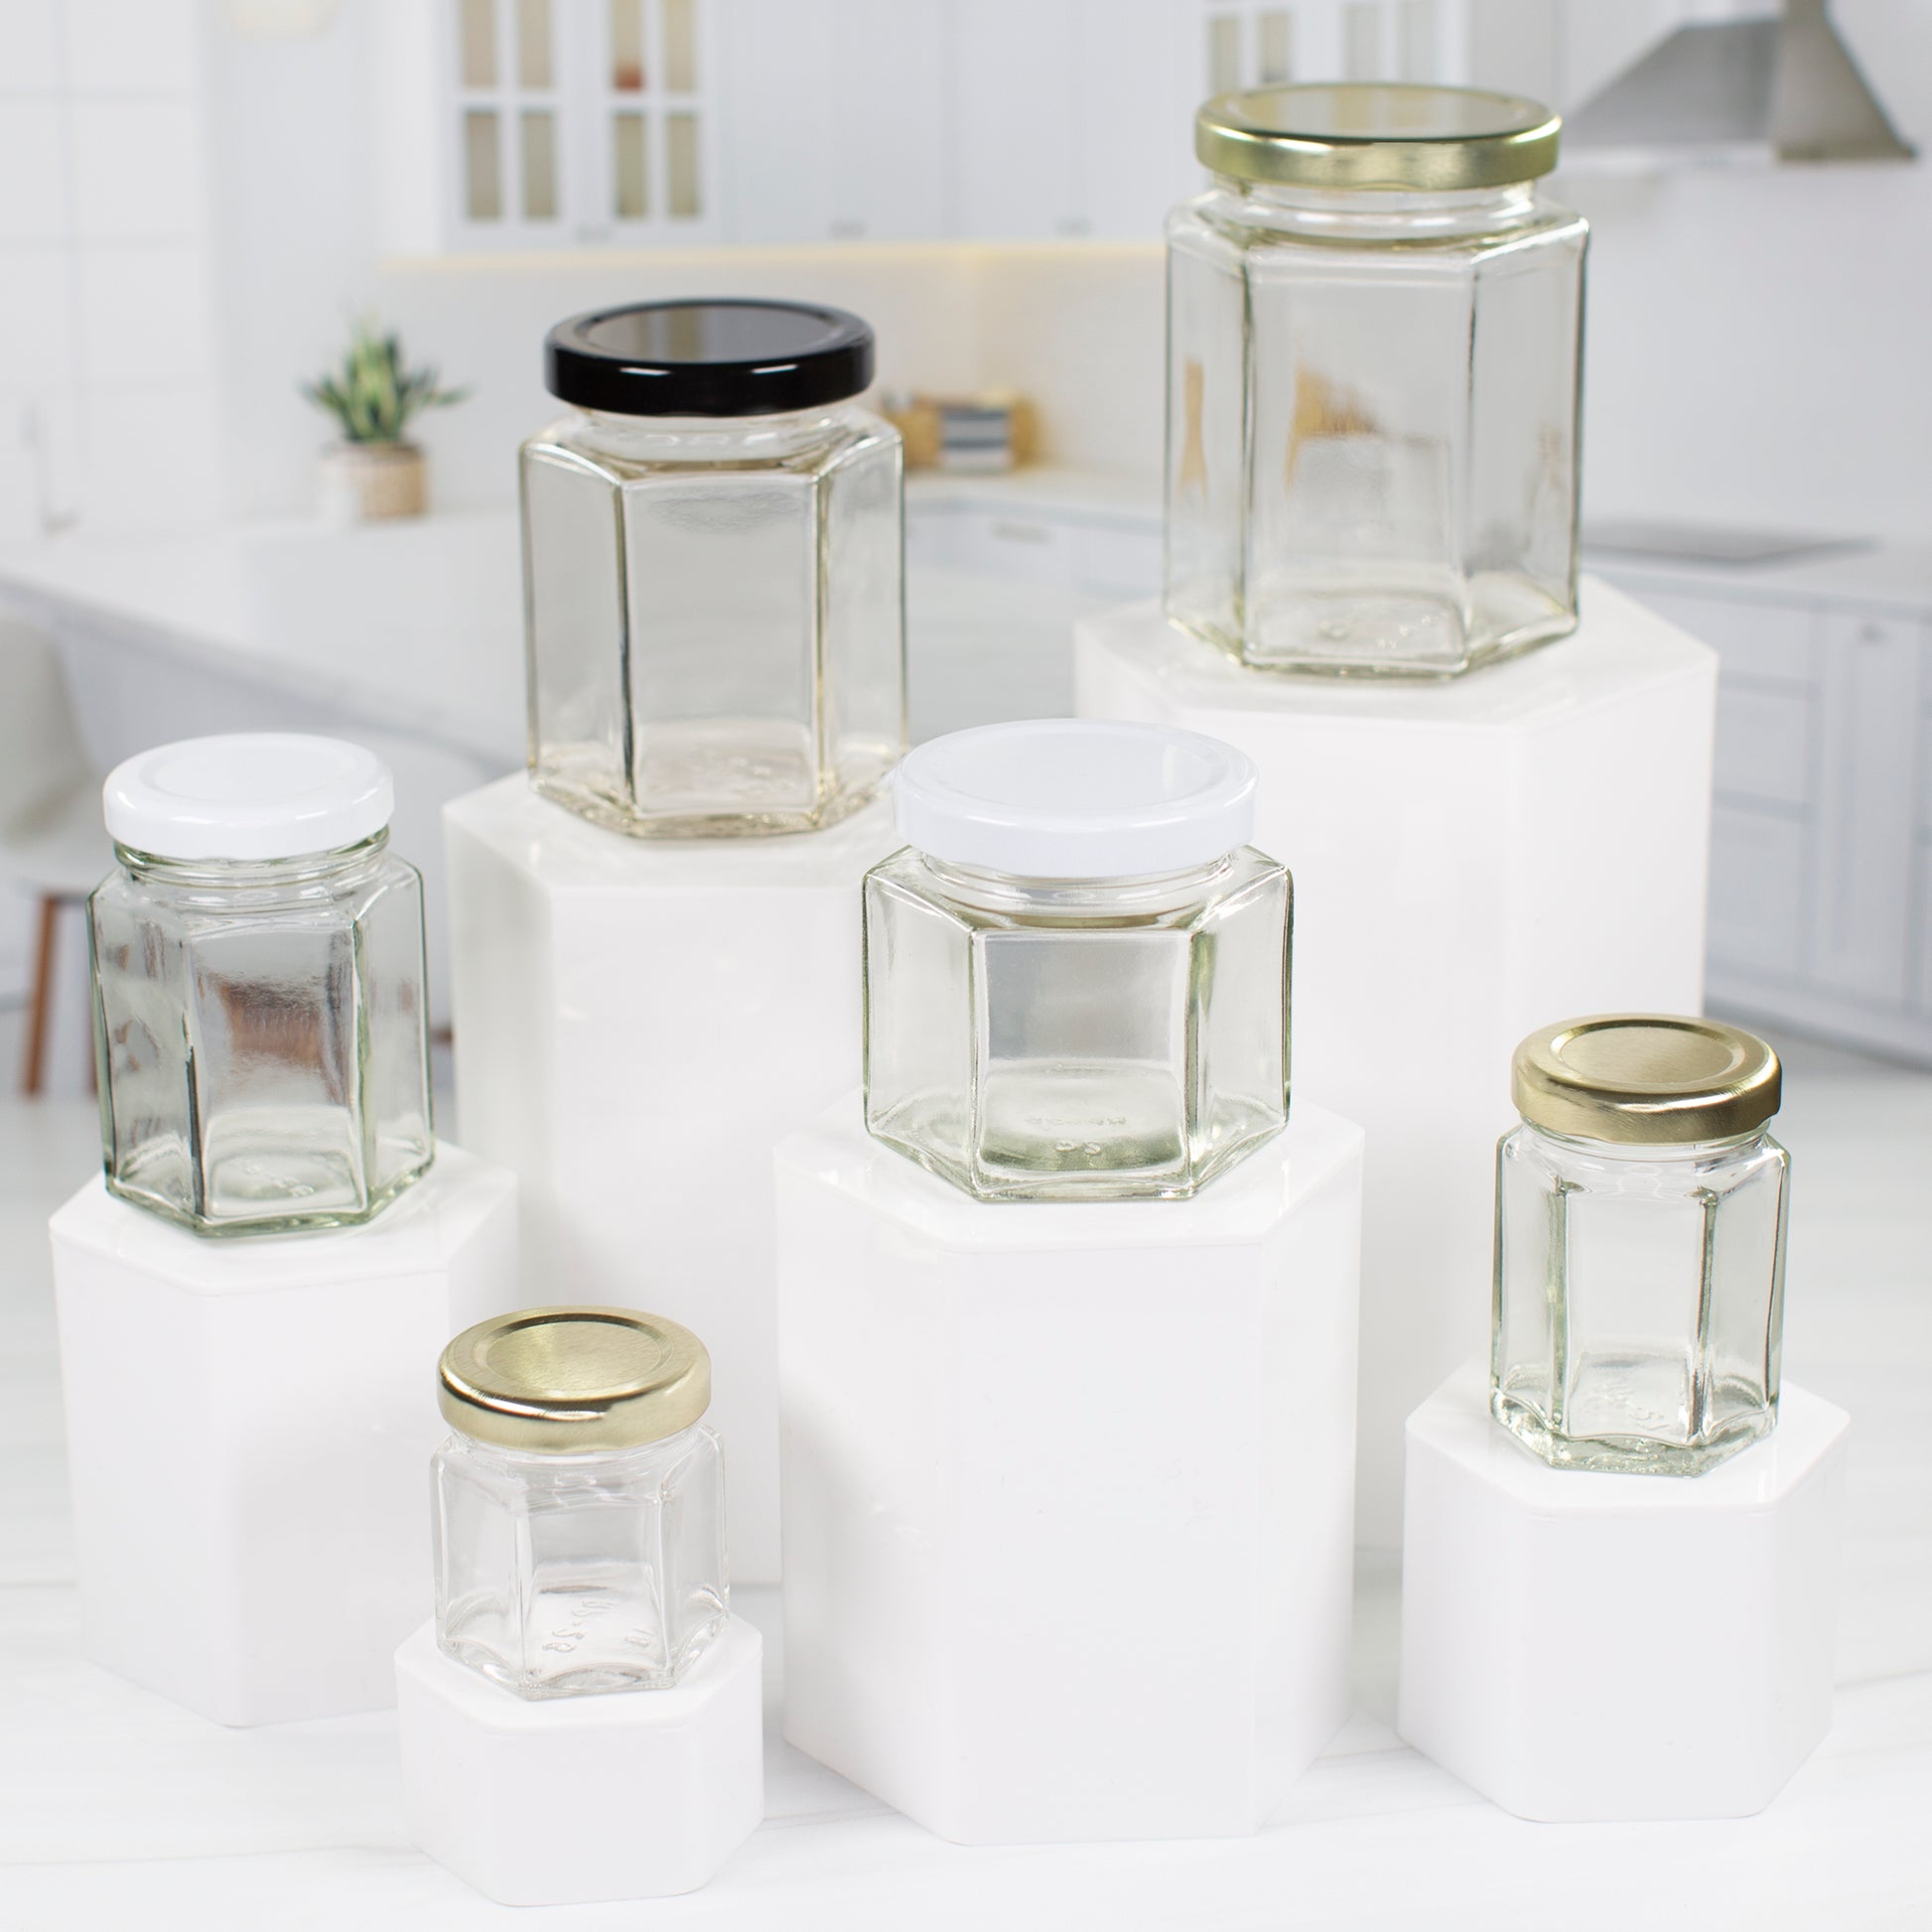 Hexagon Jars Gold Lid (15pcs, 6.0 oz) Hexagon Glass Jars with Gold  Plastisol Lined Lids for